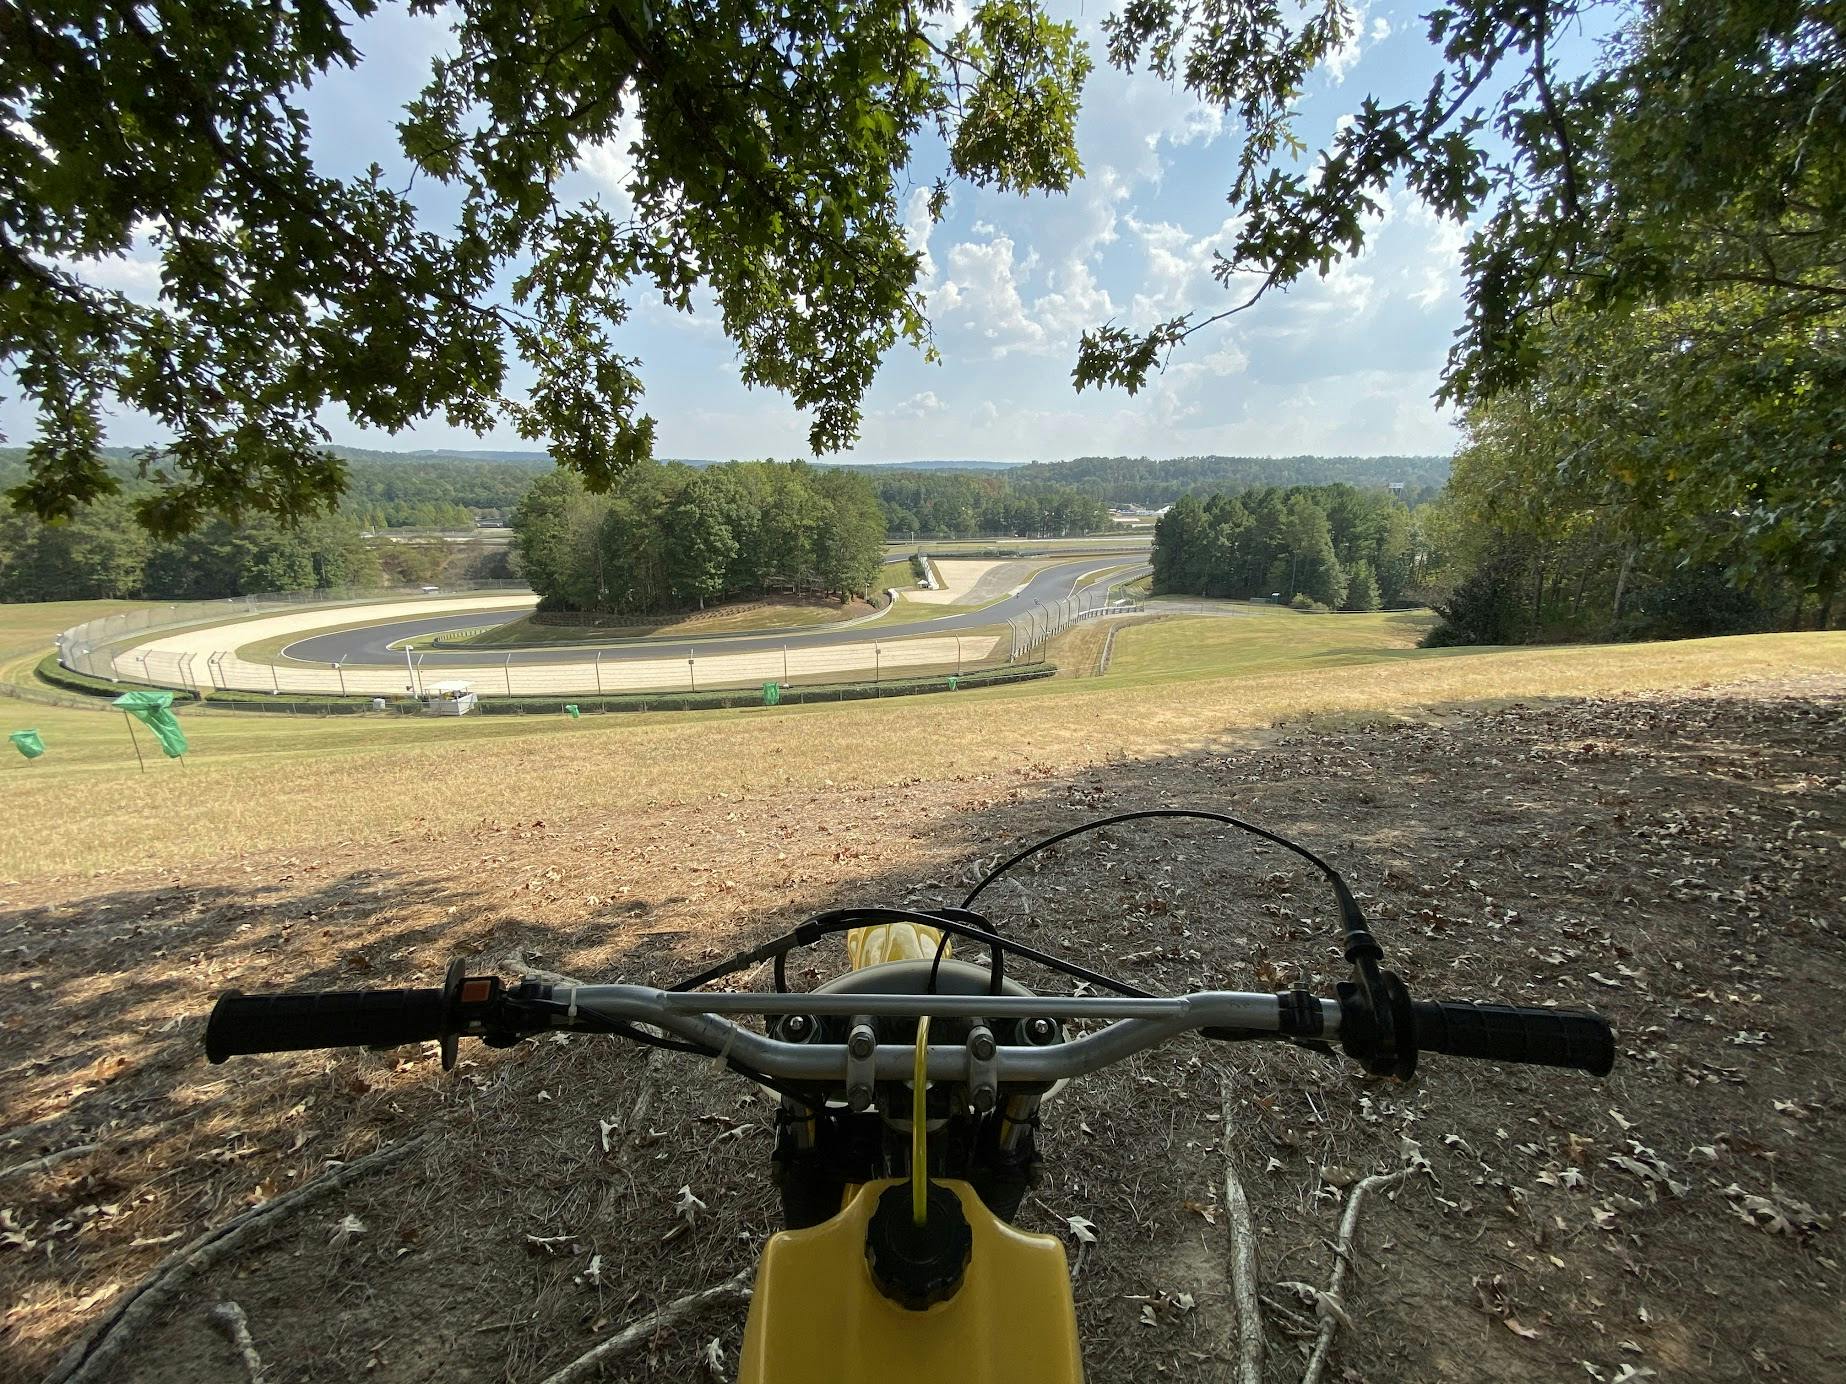 YZ overlooking turn 2 at Barber